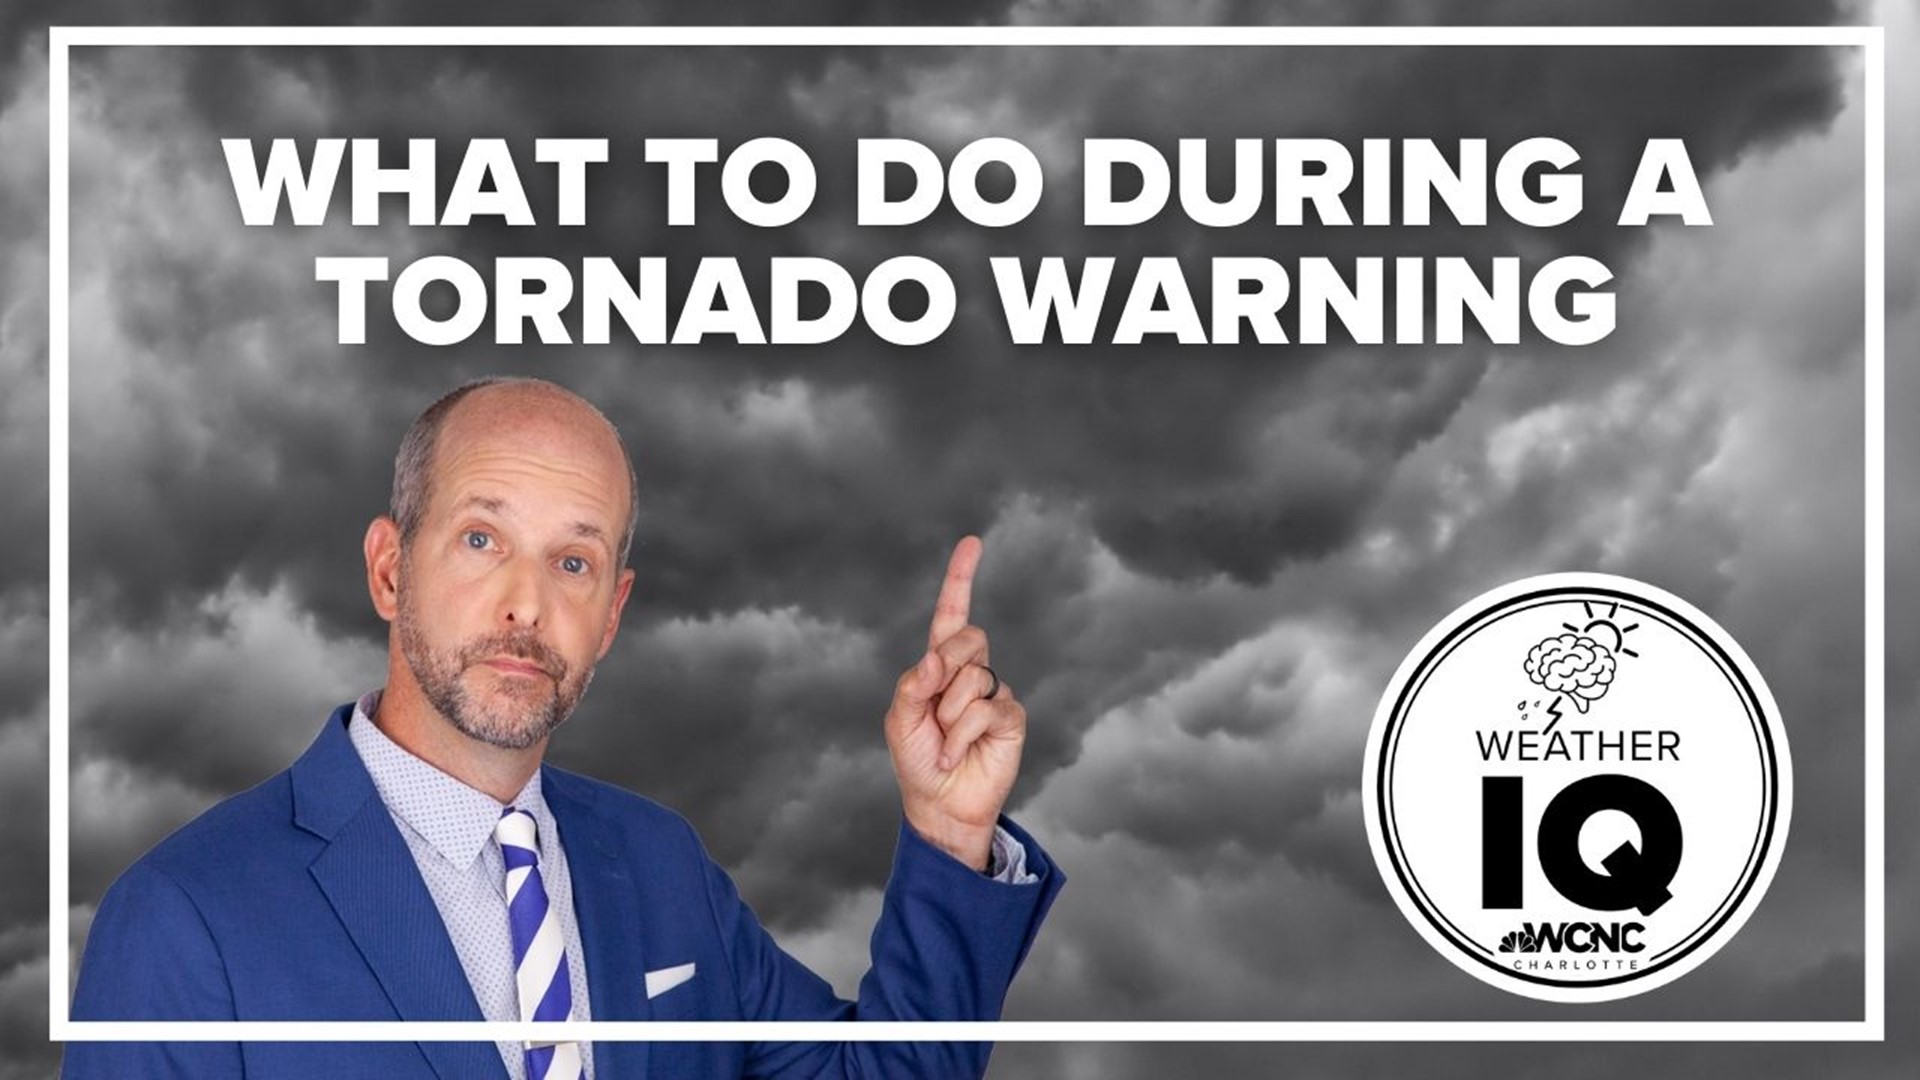 When a tornado warning is issued, you should seek shelter immediately. But what if you aren't home? The WCNC Charlotte weather team explains what you should do.